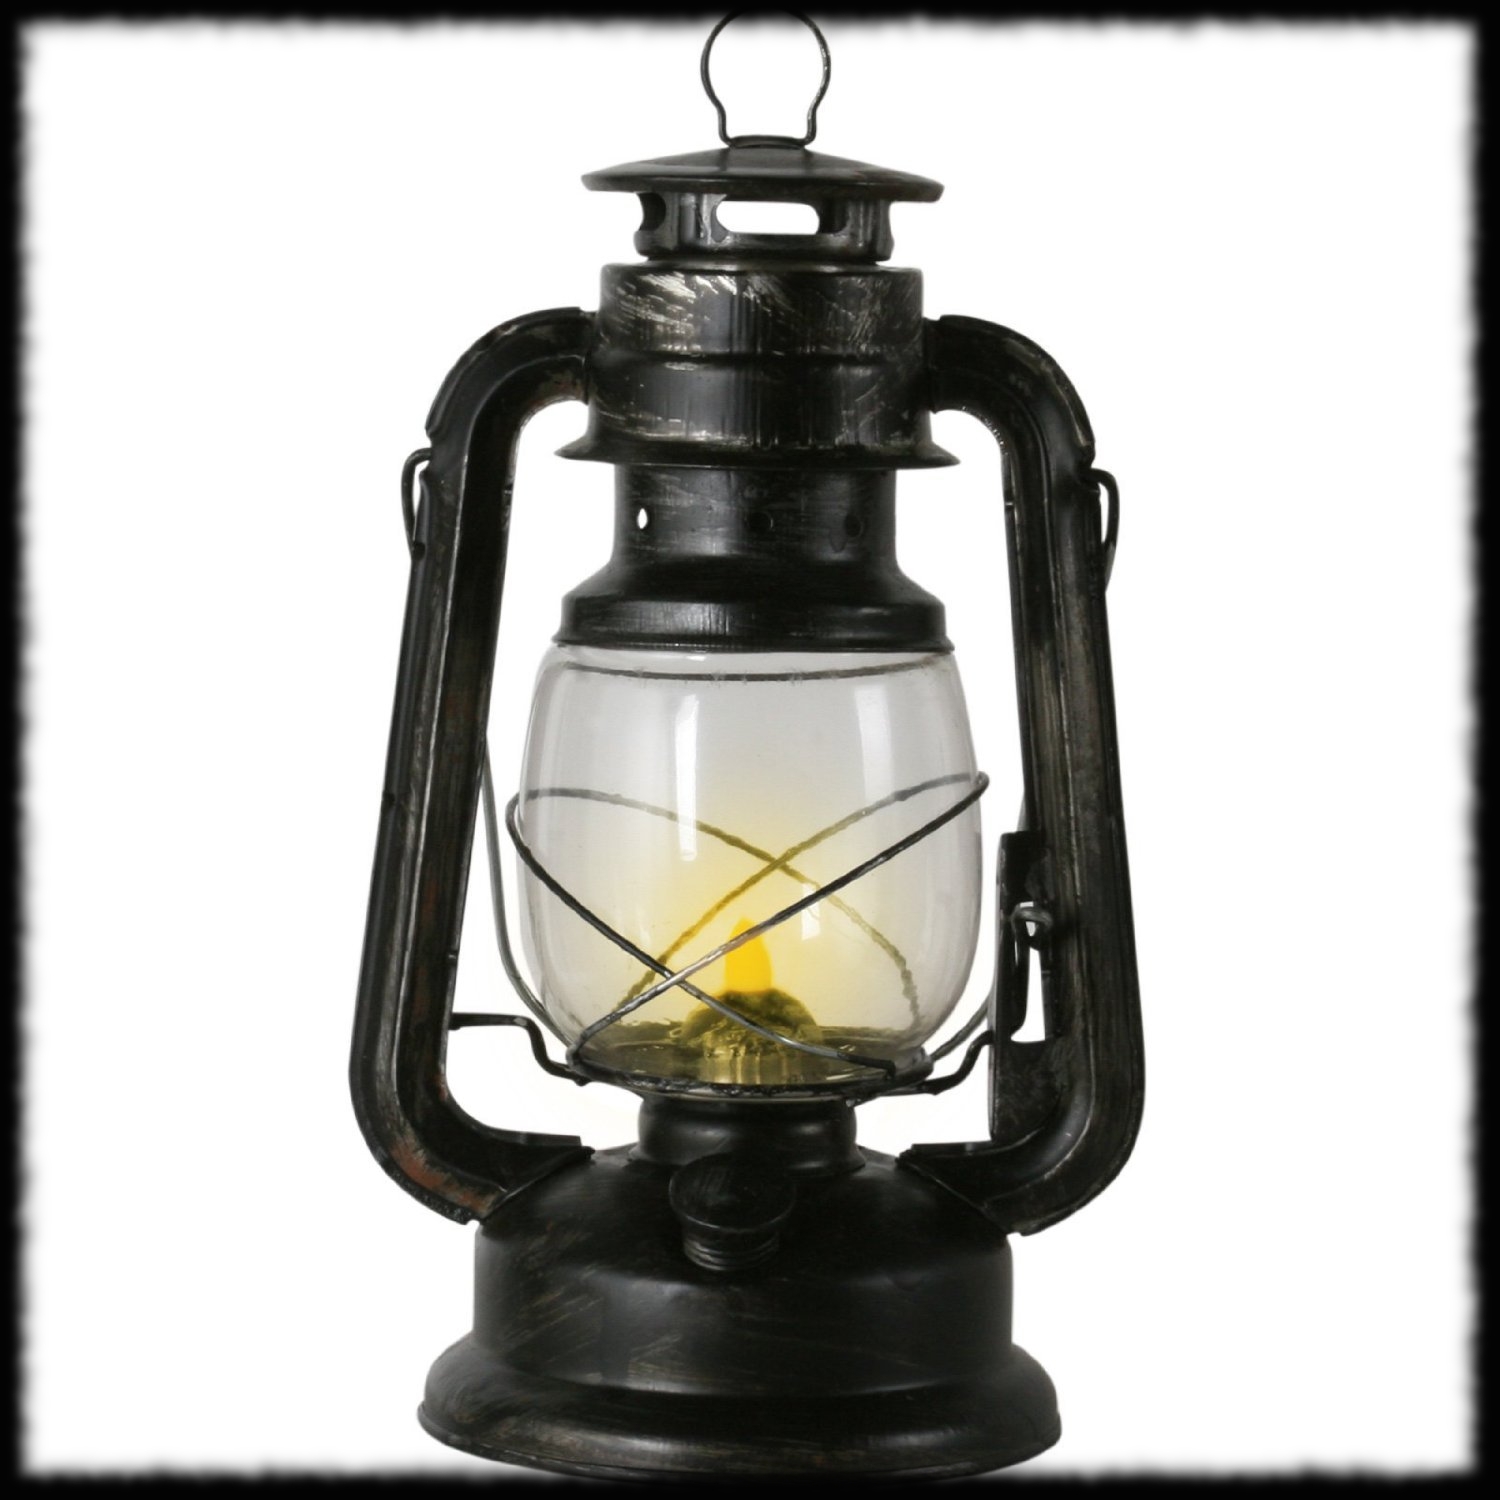 Antique Lantern LEDs with Sounds for Haunted House